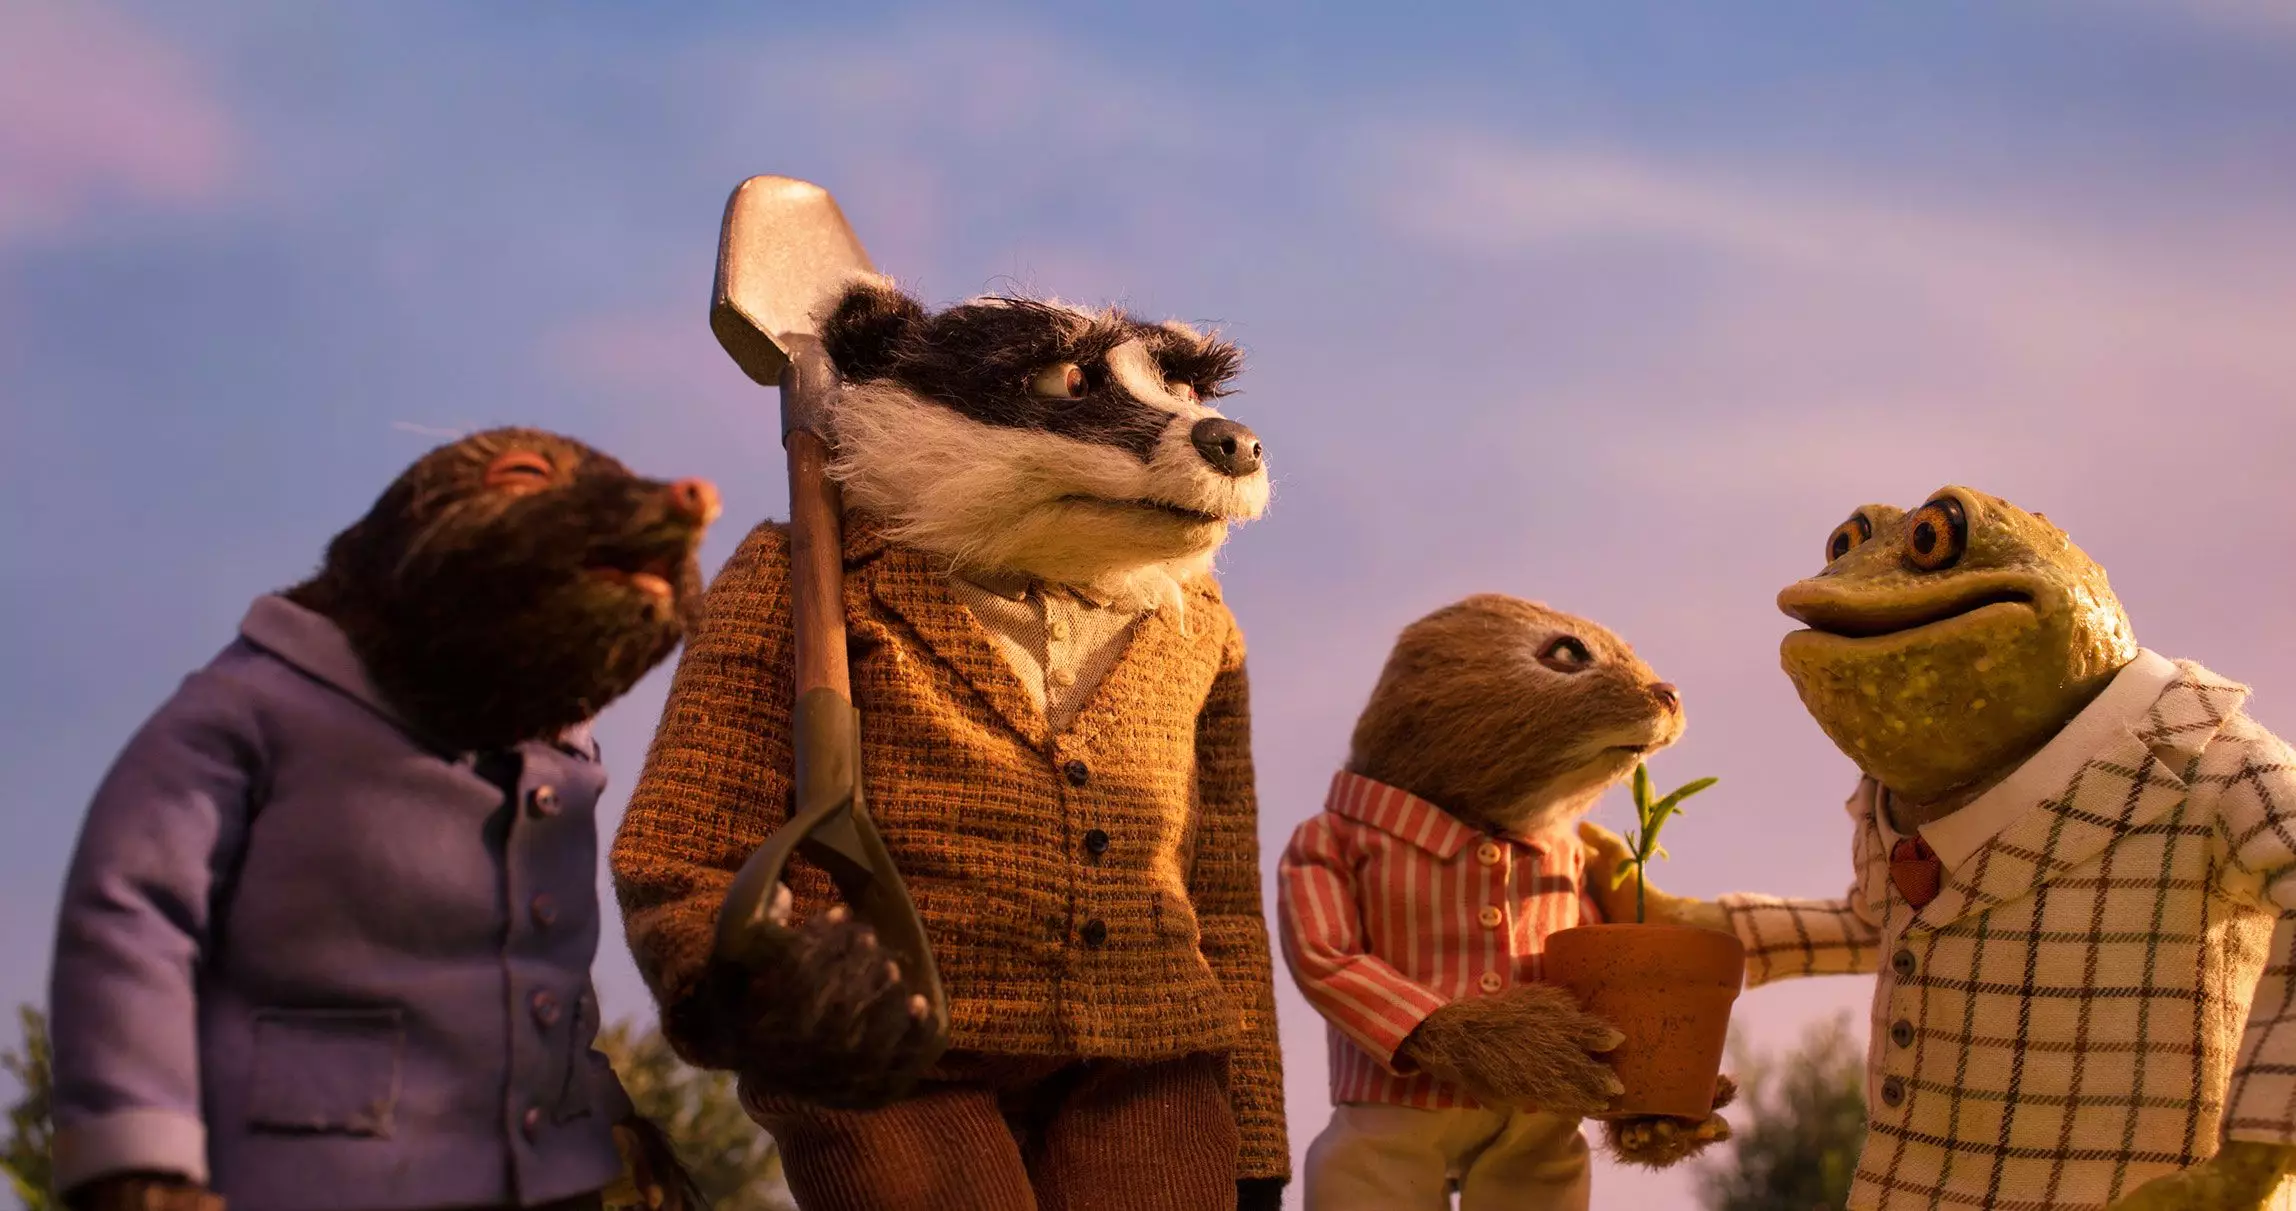 The Wildlife Trust's short film adaption that campaigned for wildlife was released in cinemas in 2019 (